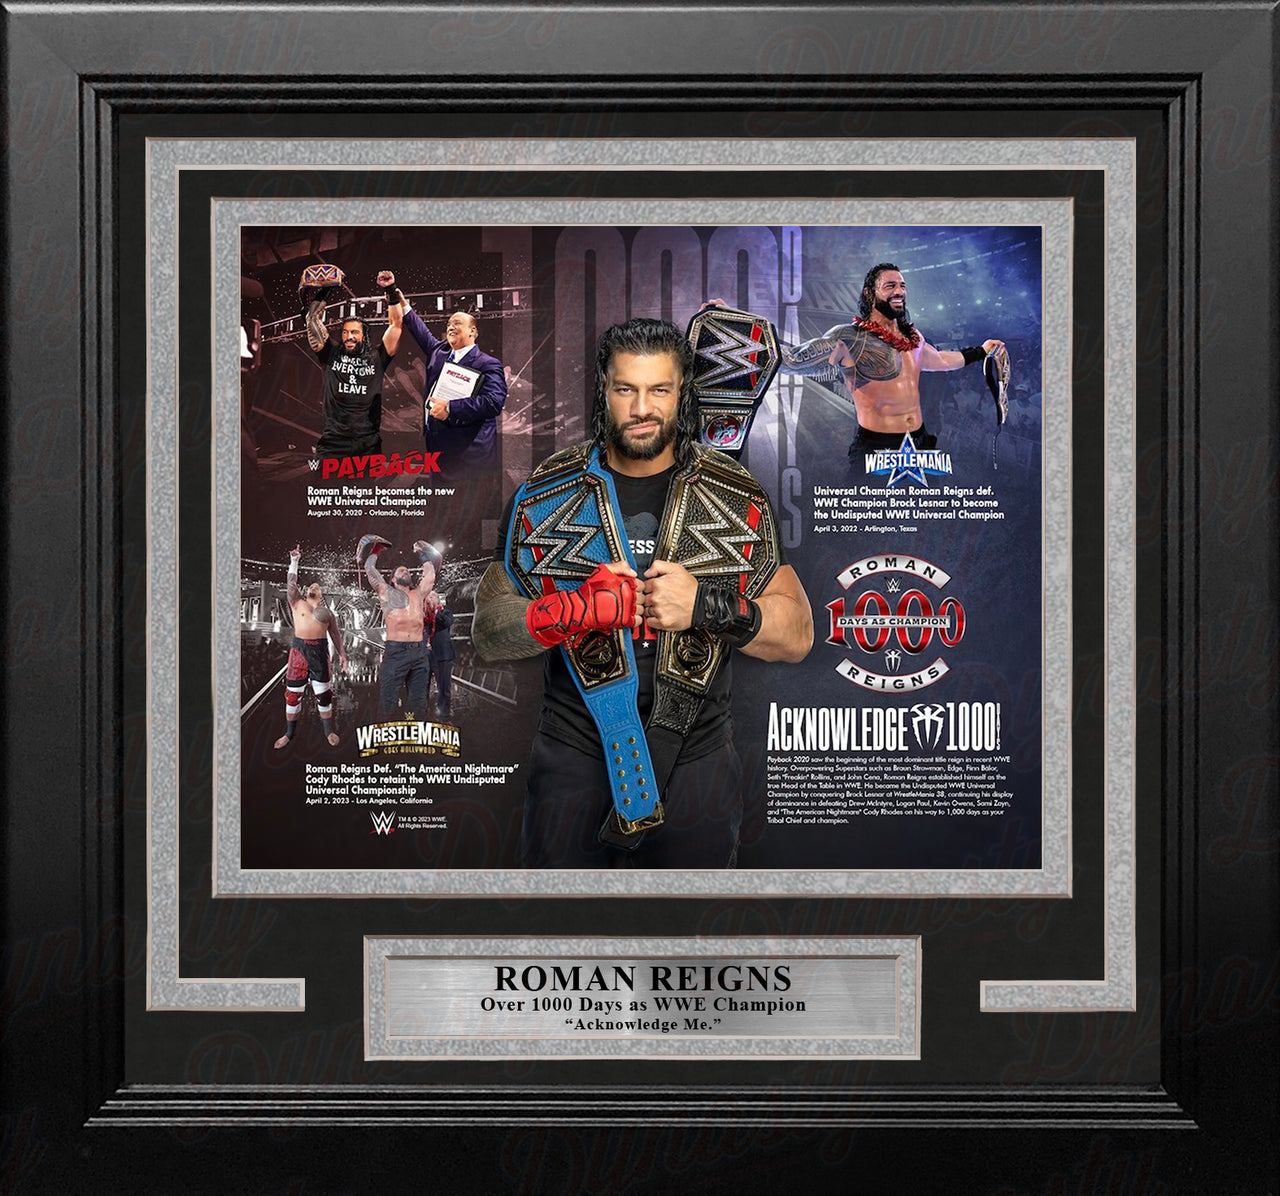 Roman Reigns 1000 Days as Champion 8" x 10" Framed WWE Wrestling Collage Photo